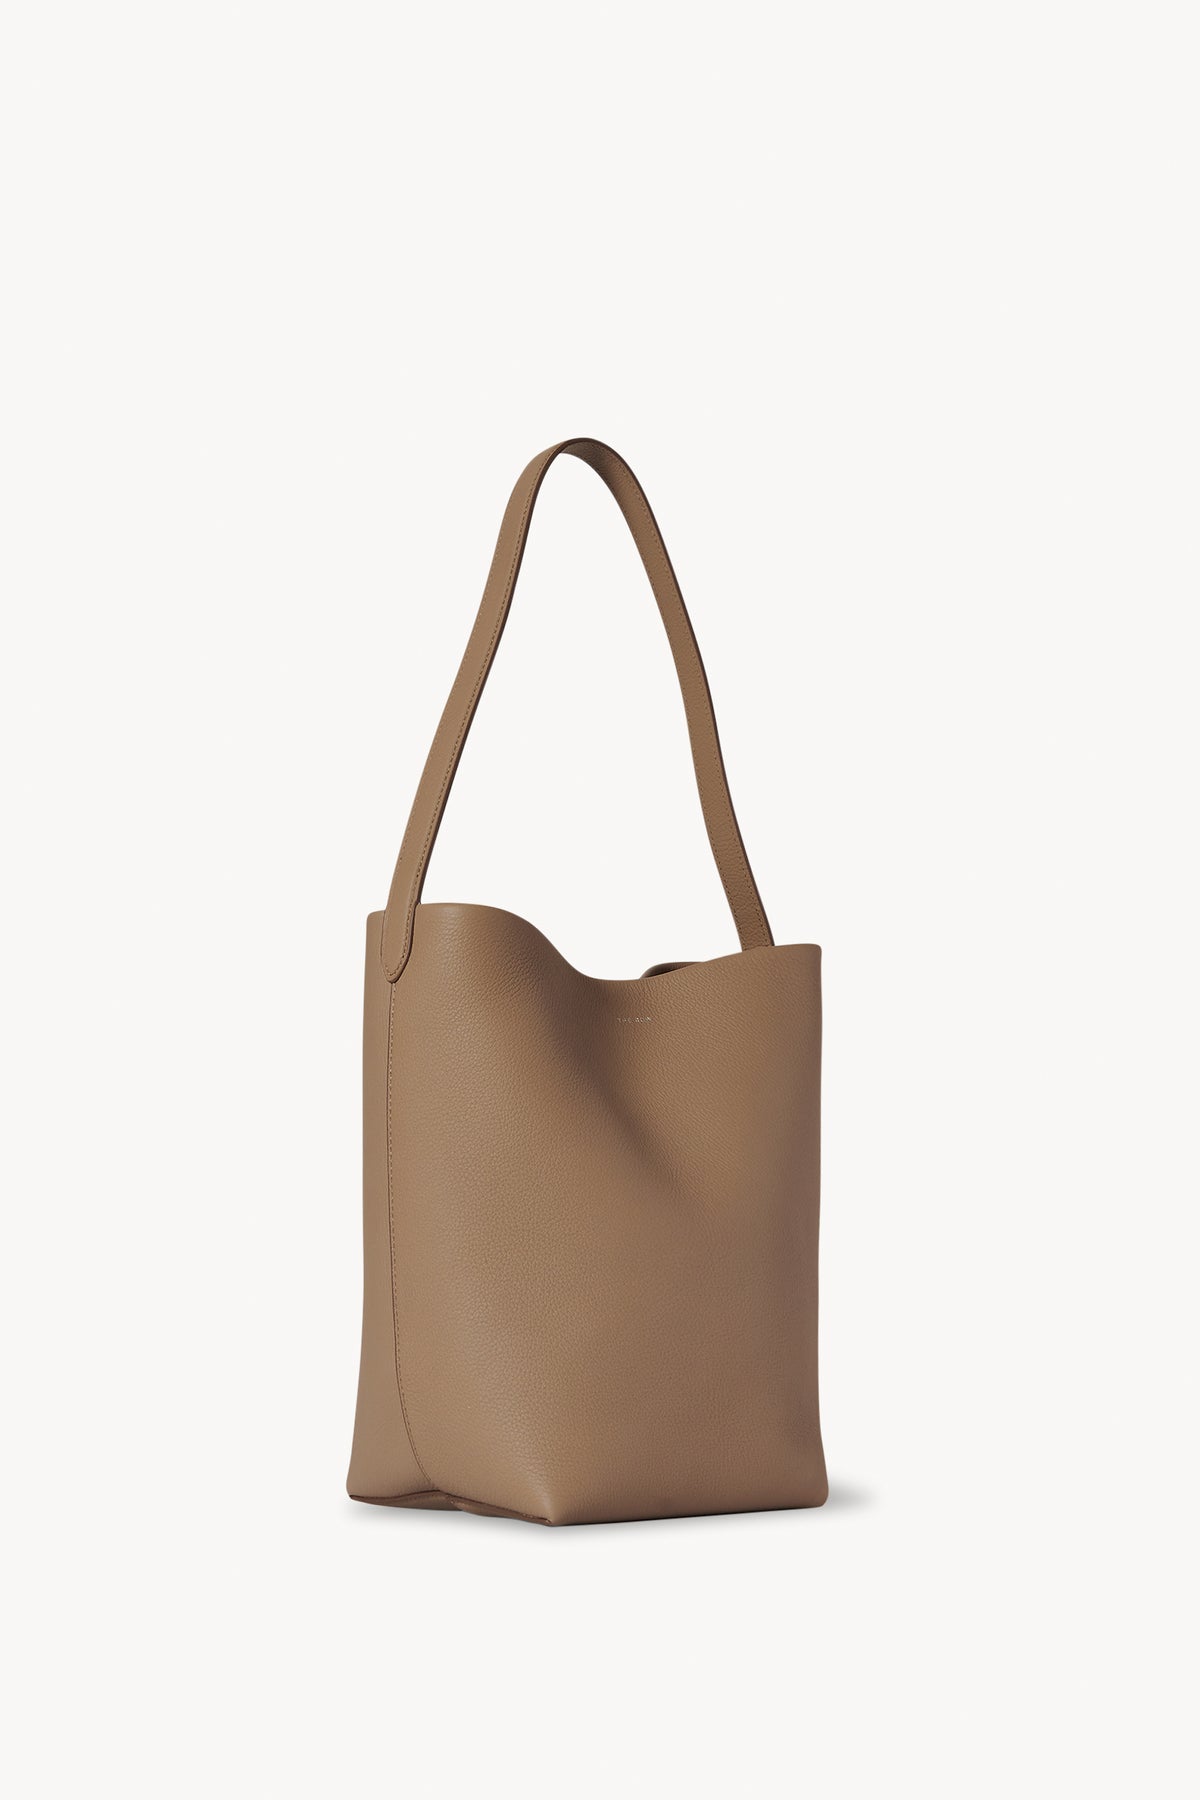 Taupe Bags | Taupe Tote Bags | Weaver Green